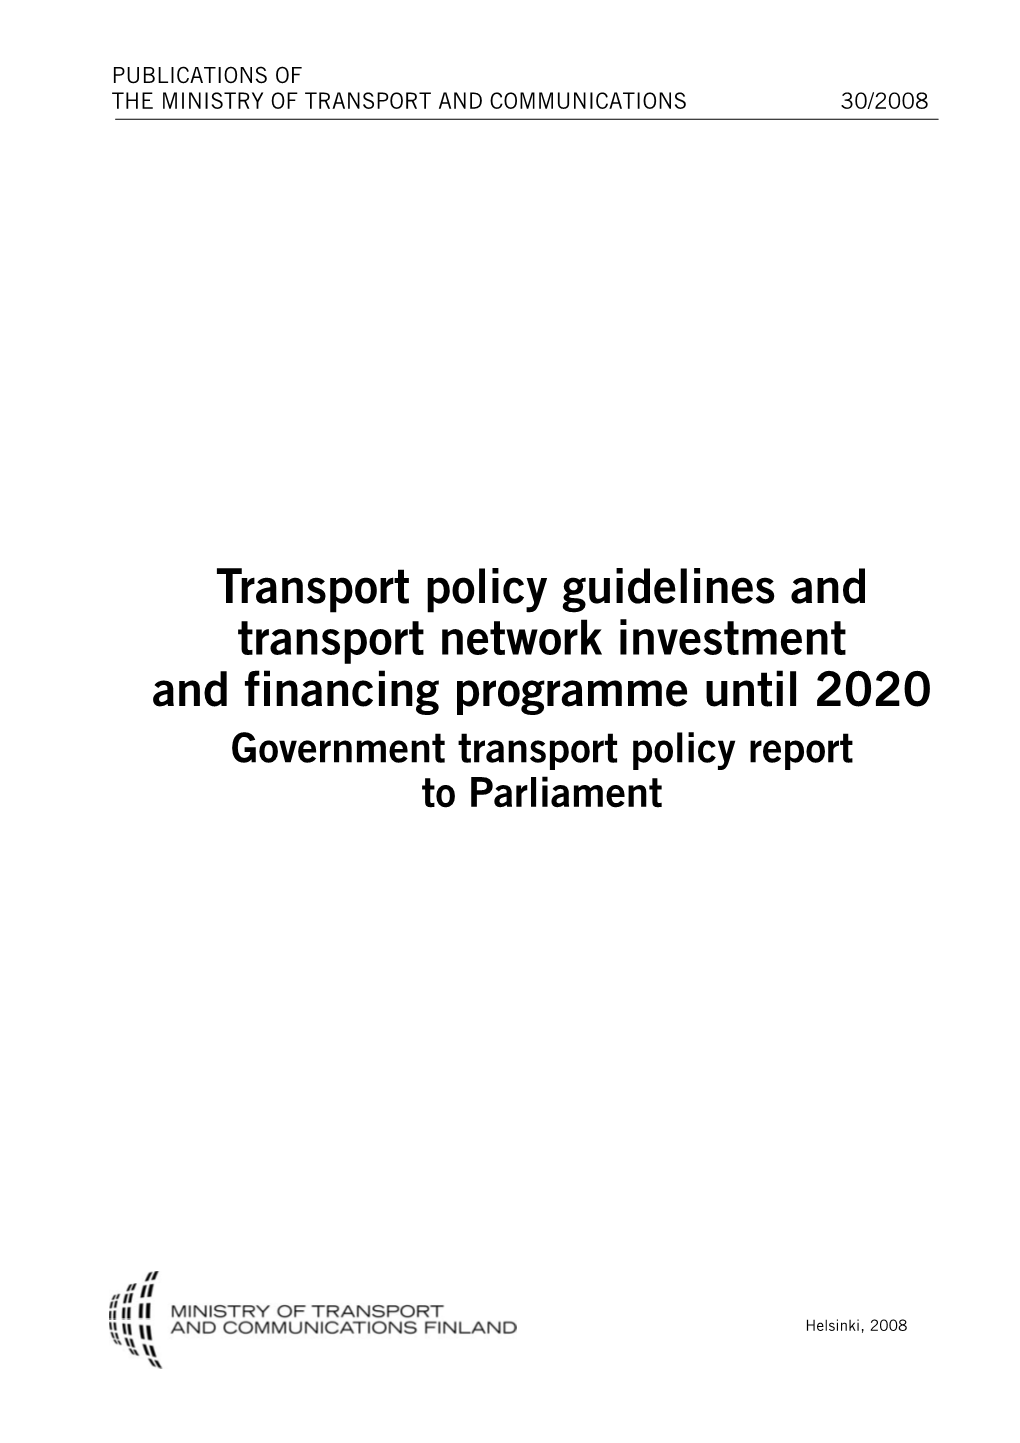 Transport Policy Guidelines.Pdf